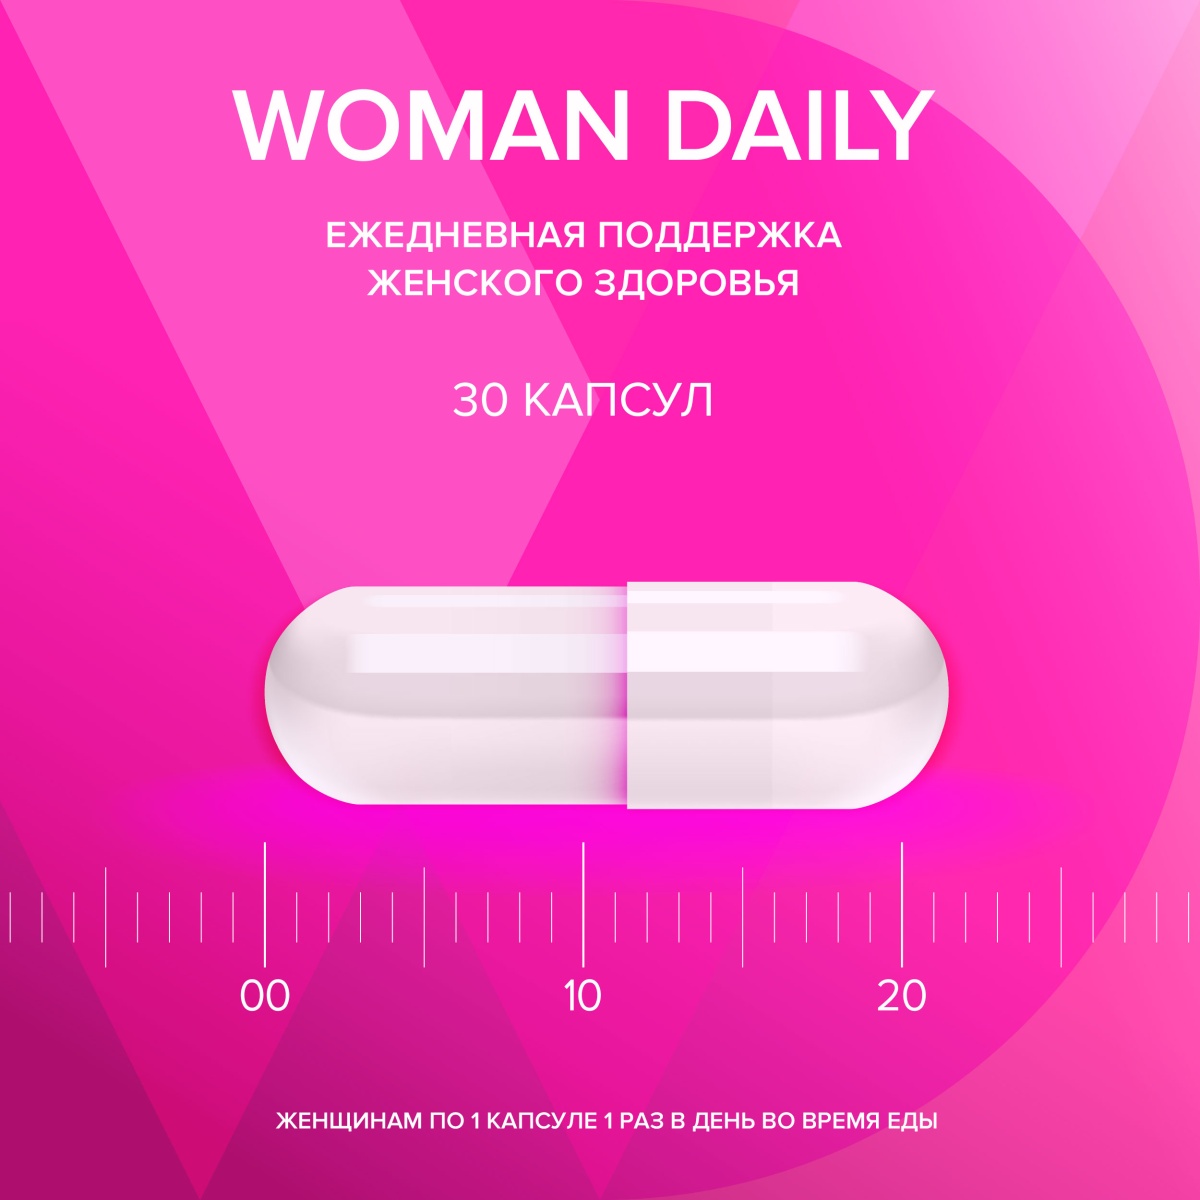 WOMAN DAILY